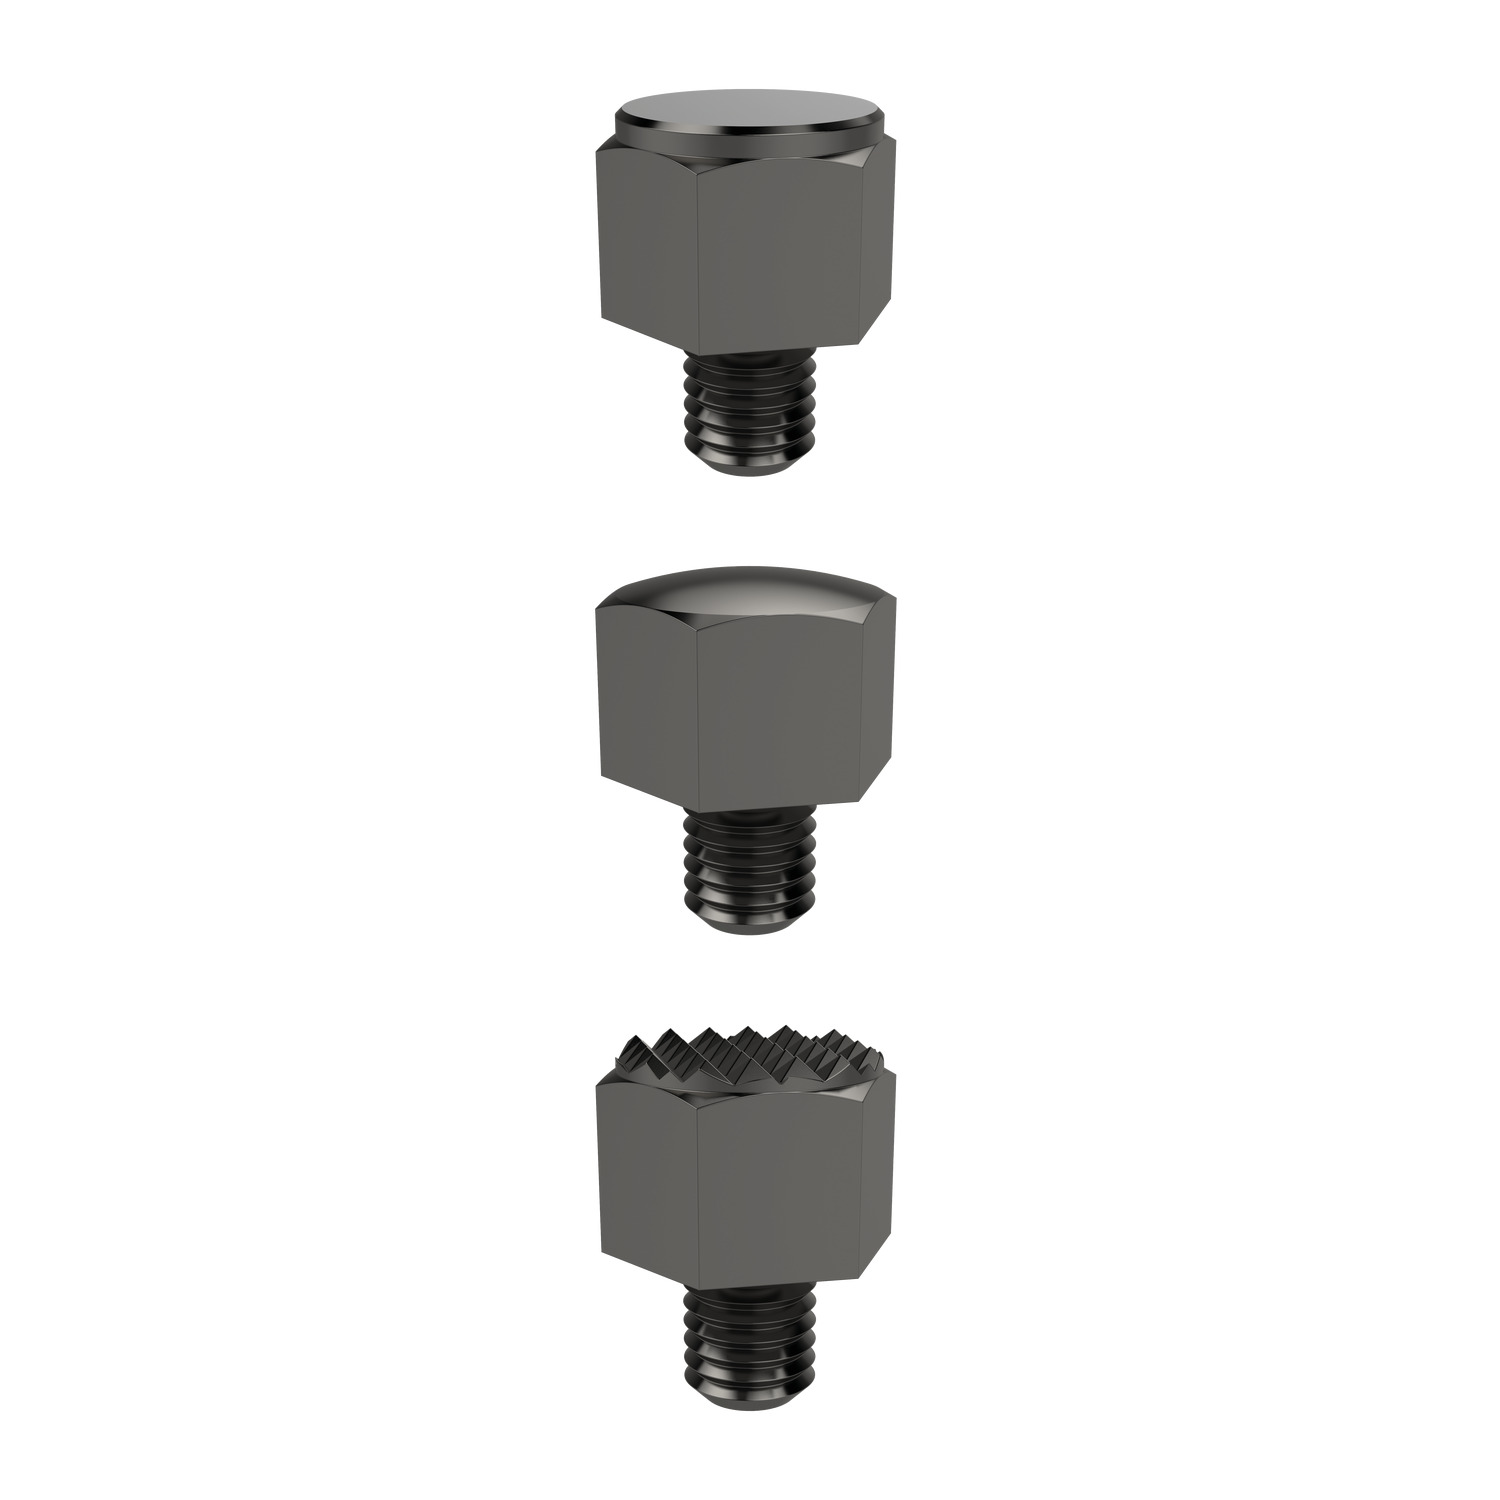 Threaded Rest Buttons Male thread screwed rest buttons made from blackened steel. For use as seats, stops and thrust pads in jugs and fixtures